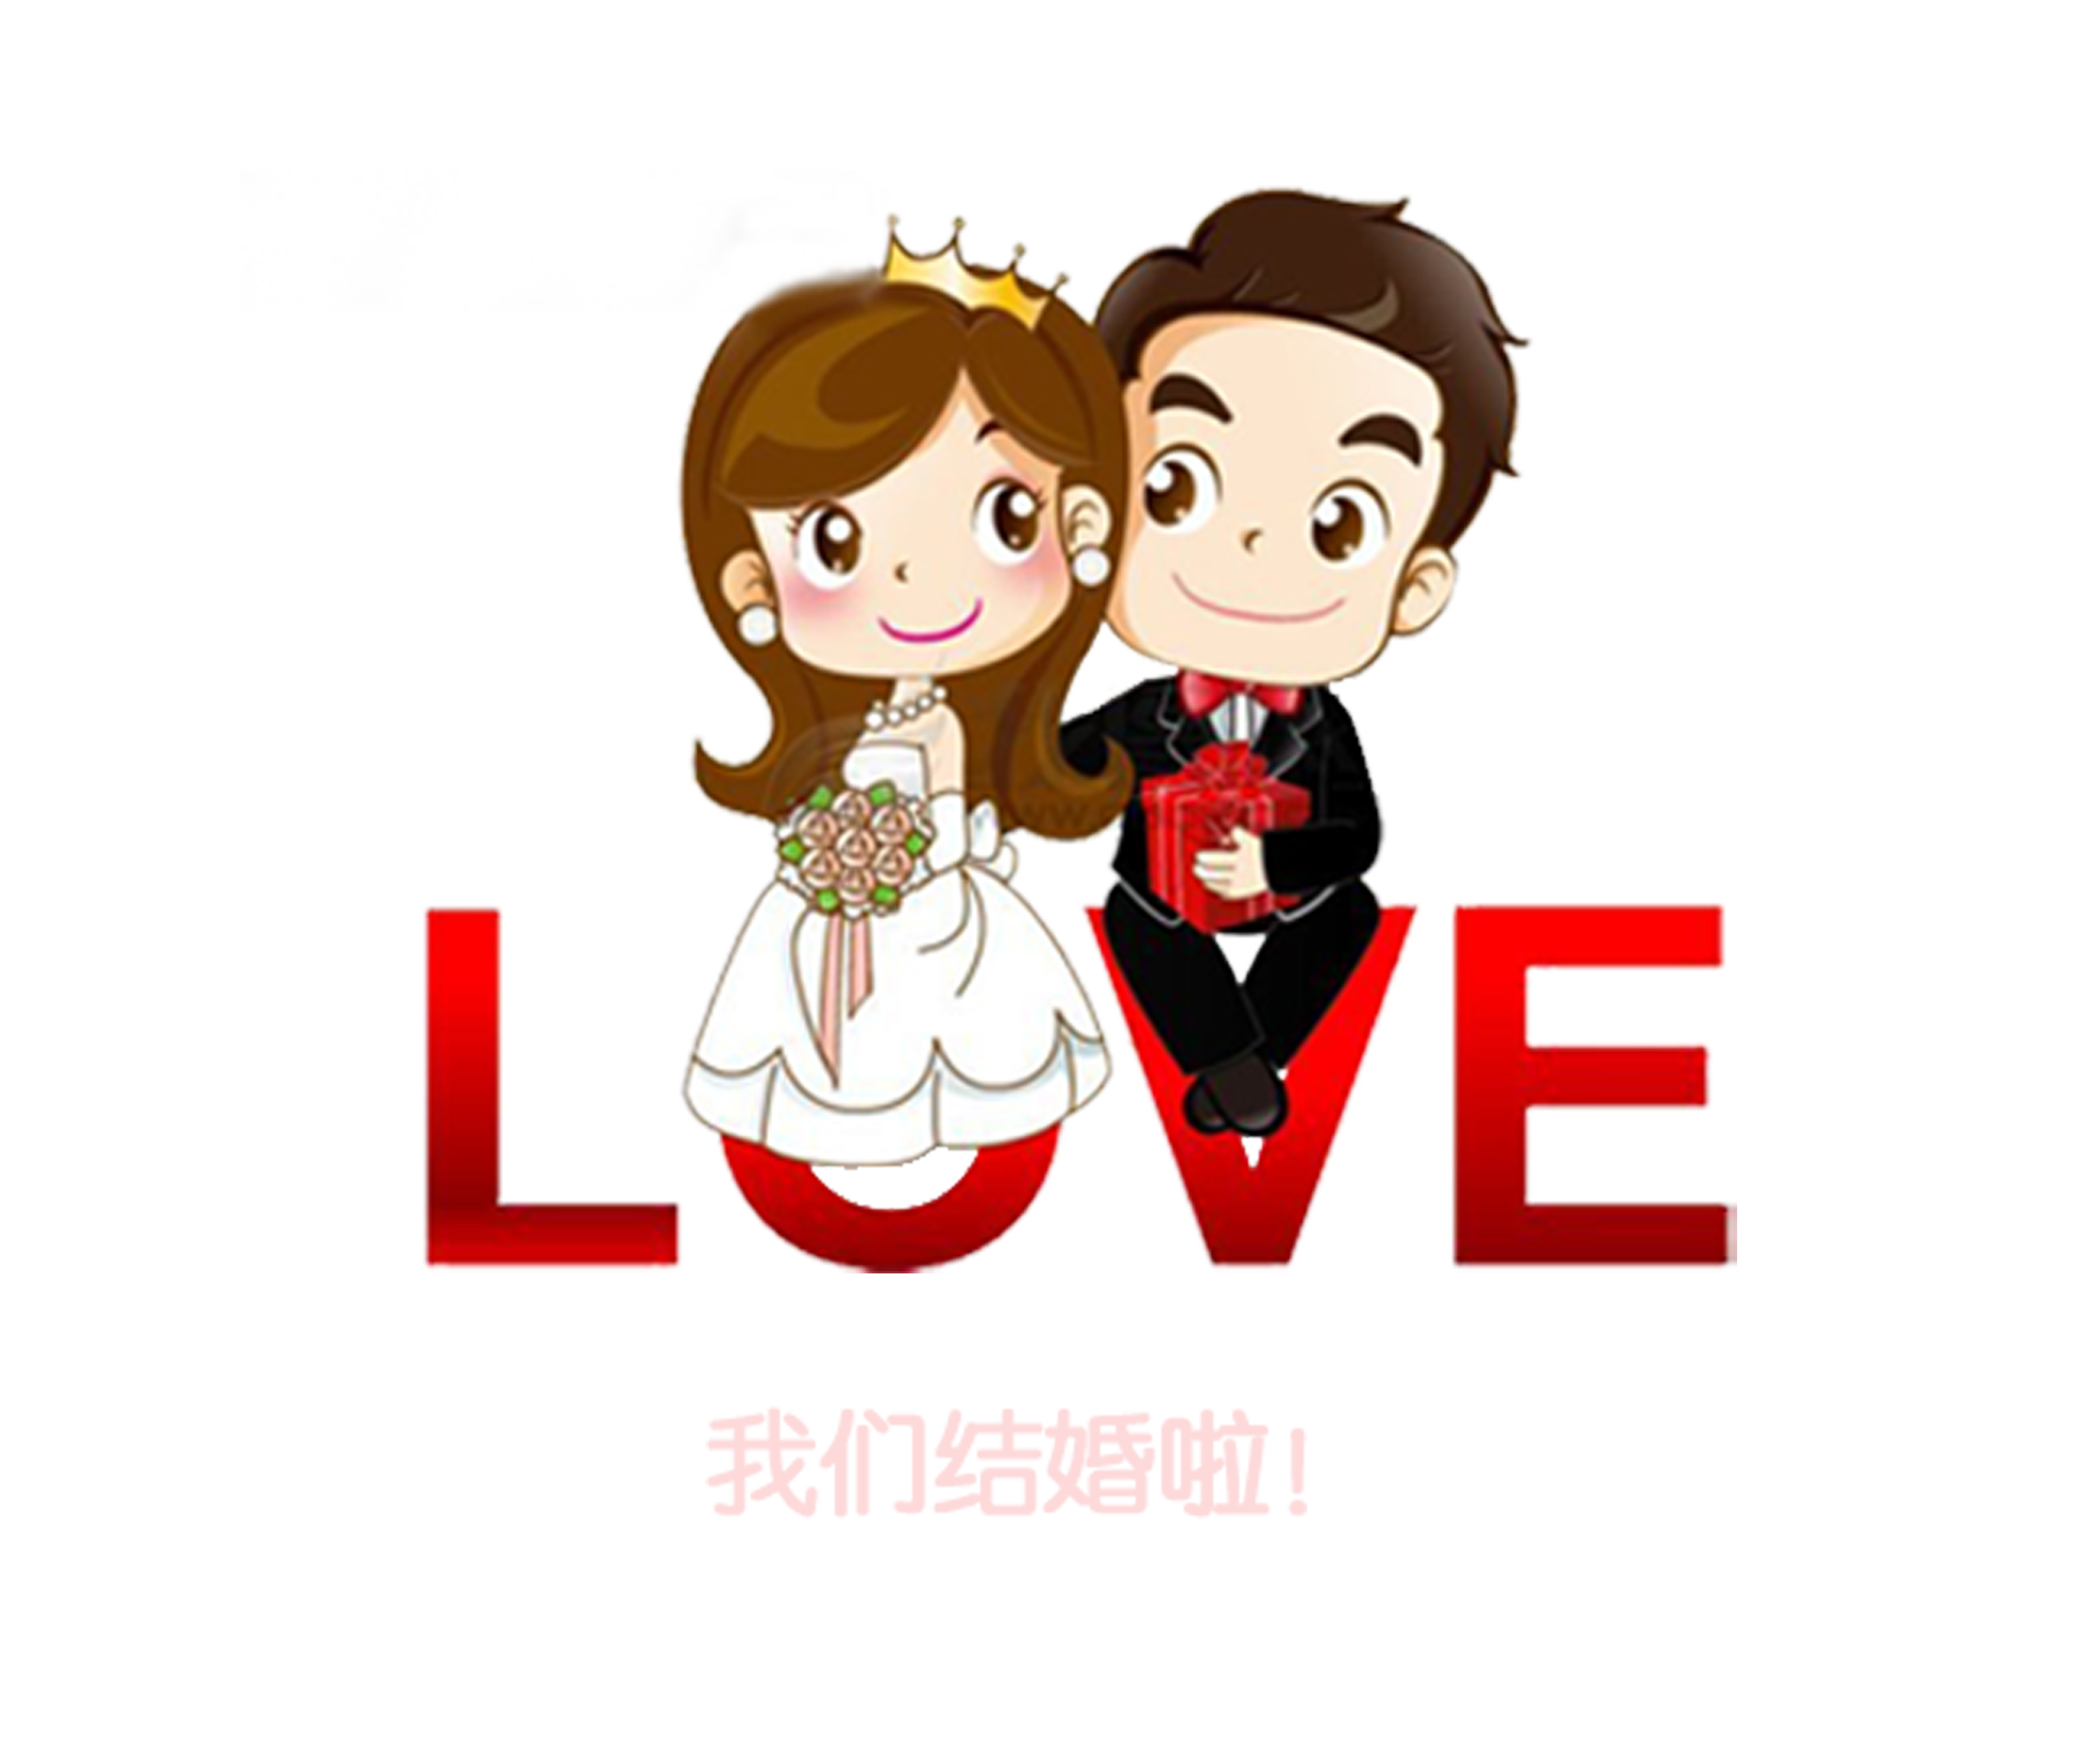 marriage clipart married person